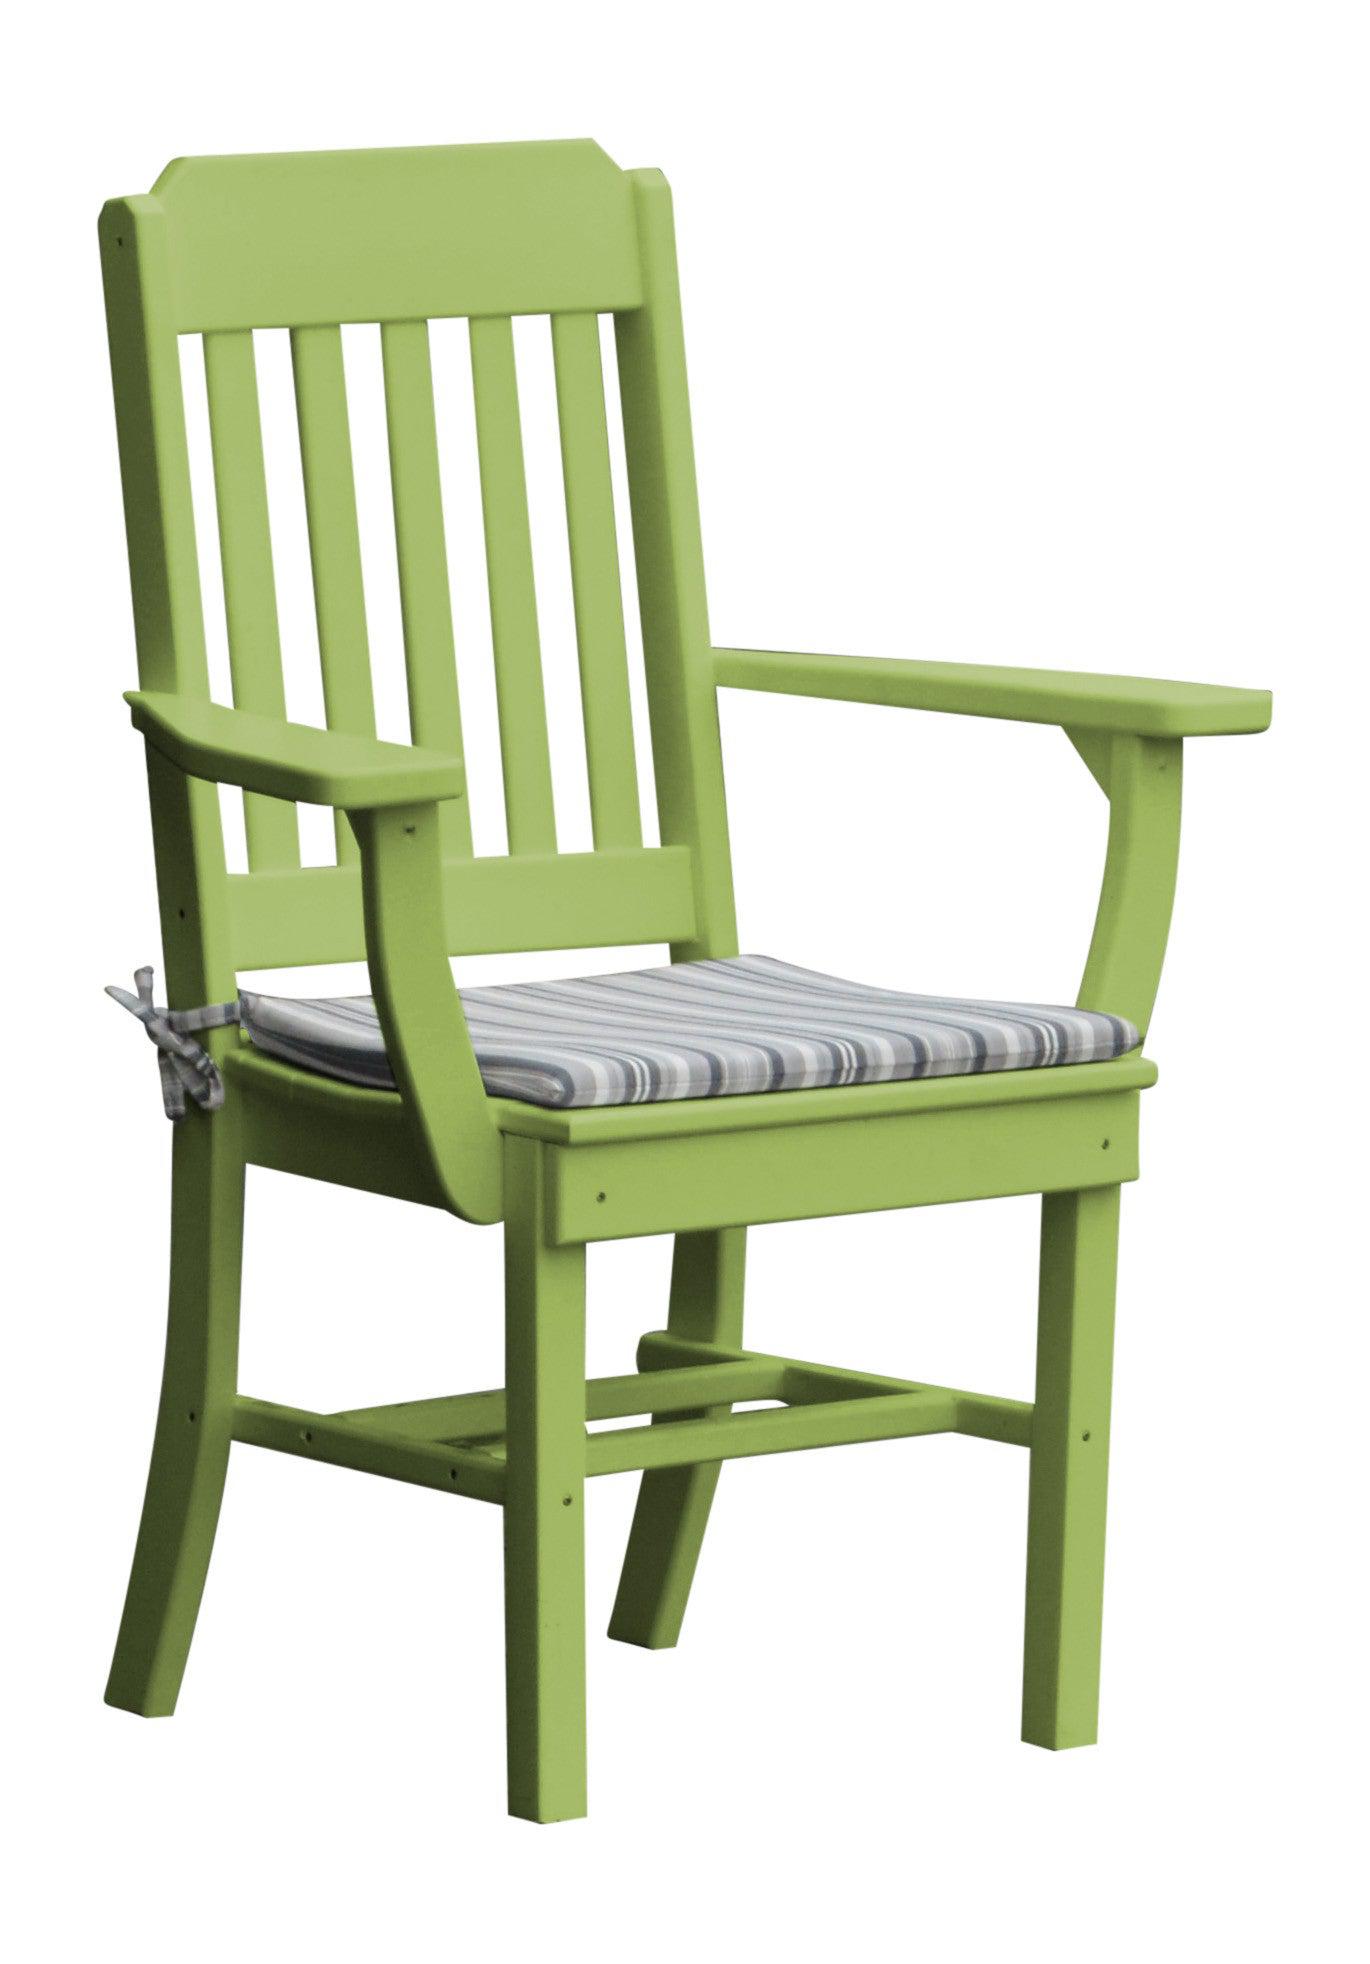 A&L Furniture Company Recycled Plastic Traditional Dining Chair w/ Arms - Tropical Lime